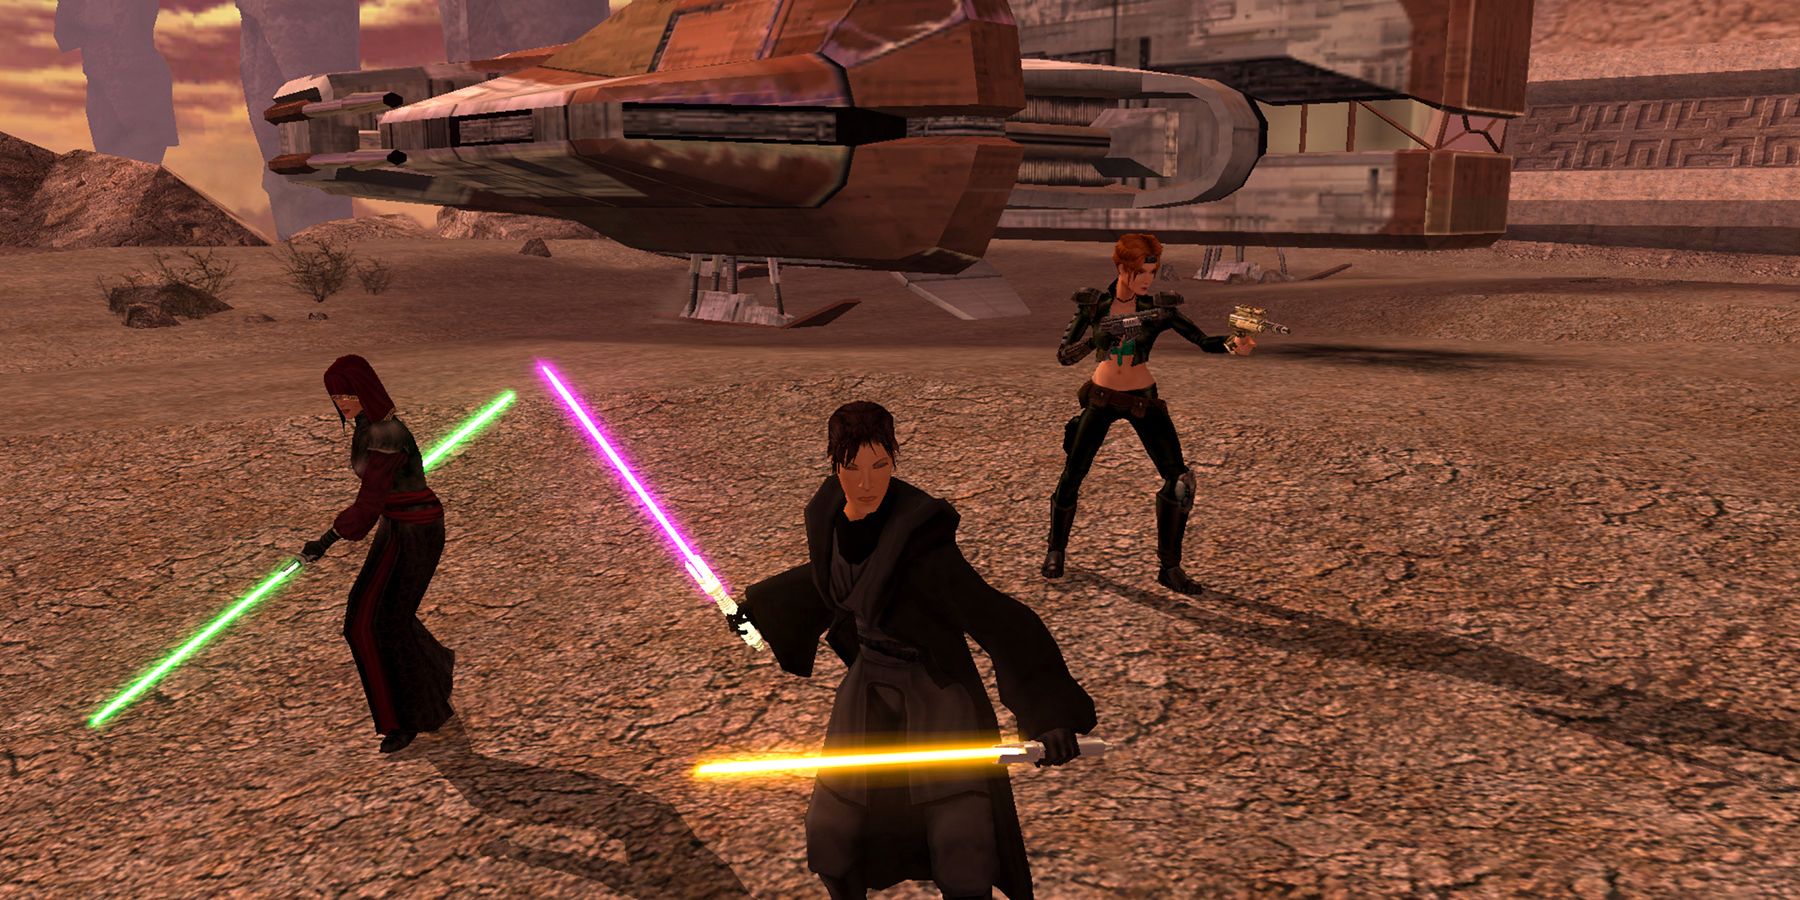 A playable party standing in front of the Ebon Hawk in Star Wars: Knights of the Old Republic 2.